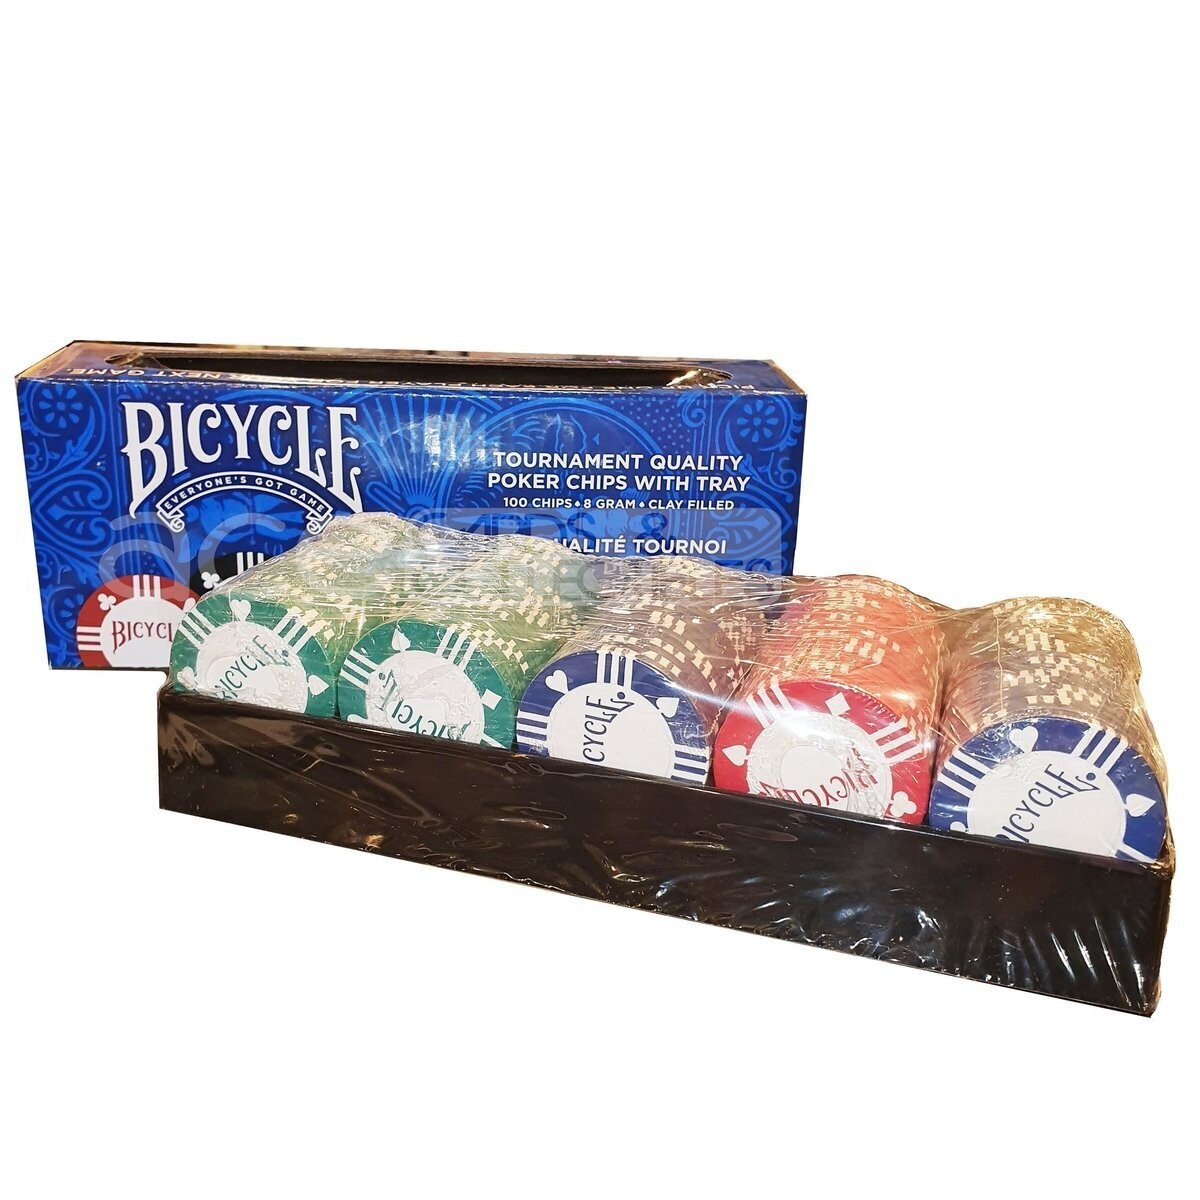 Bicycle Poker Chips Tournament Quality (8 gram, 2 color, clay filled, 100ct w/ tray)